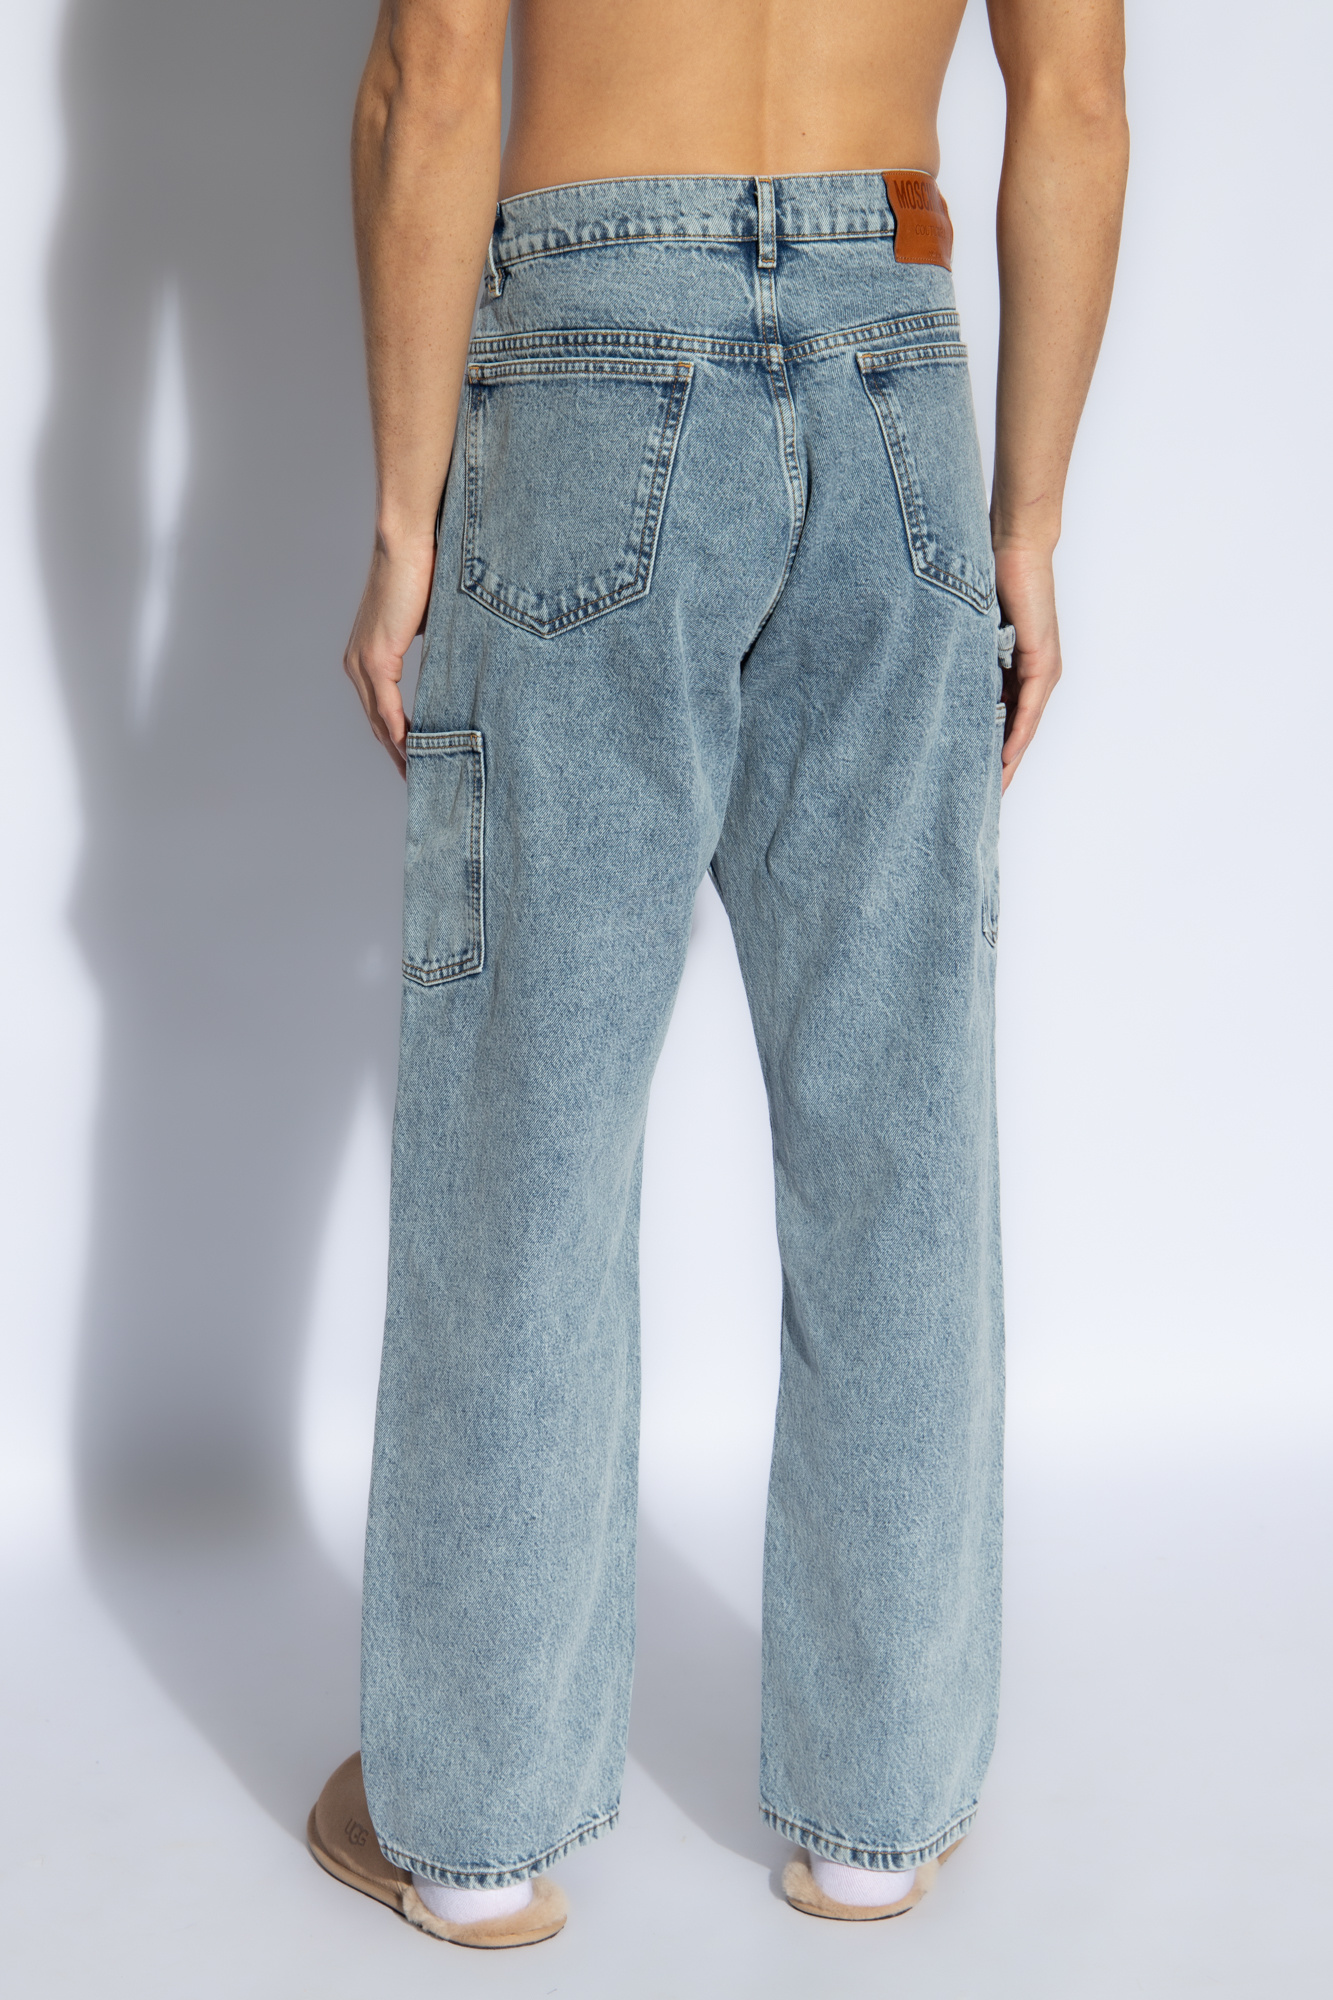 Moschino Jeans with vintage effect